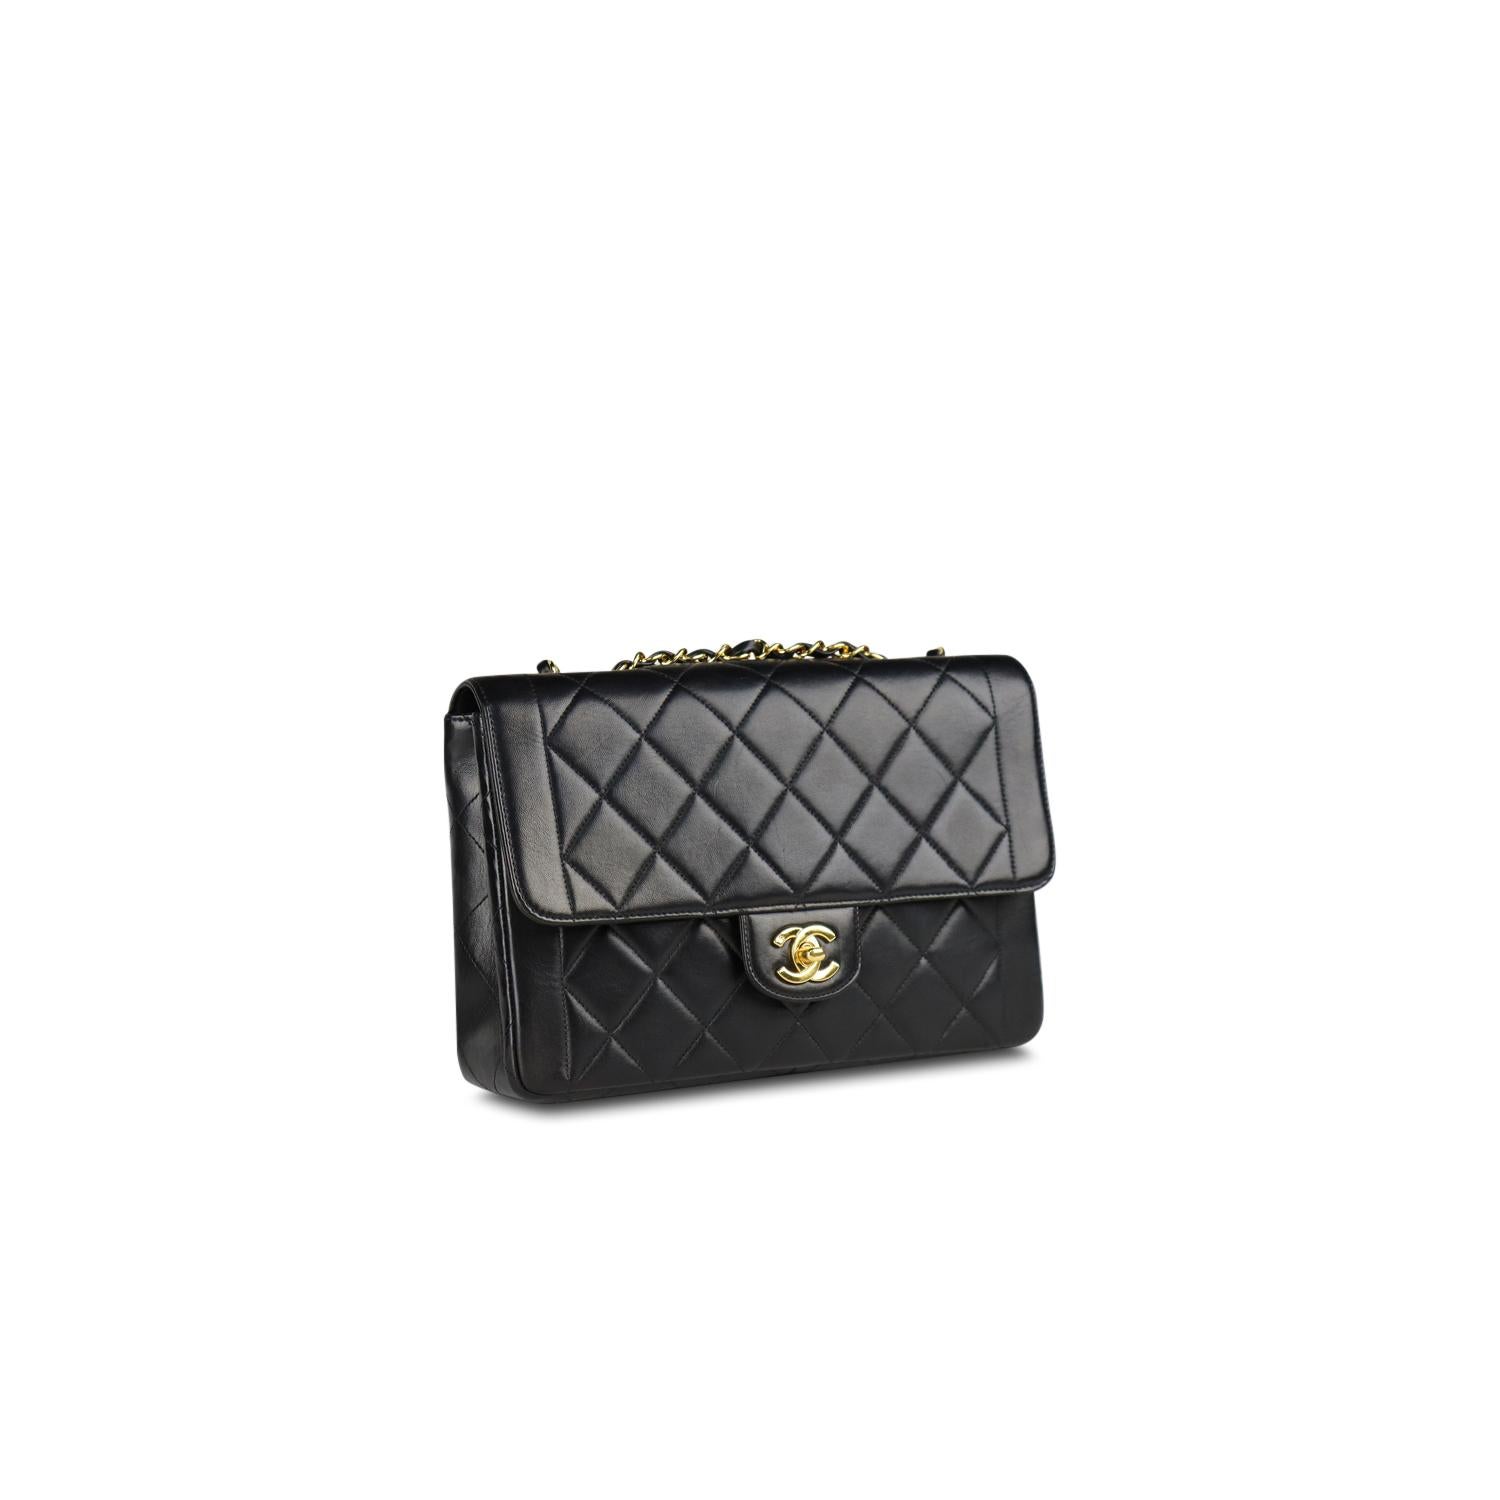 Black quilted leather Chanel Classic Medium Single Flap Bag with

– Gold-tone hardware
– Convertible chain-link and leather shoulder strap
– Tonal leather lining
– Single patch pocket at back
– Dual pockets at interior wall; one with zip closure and